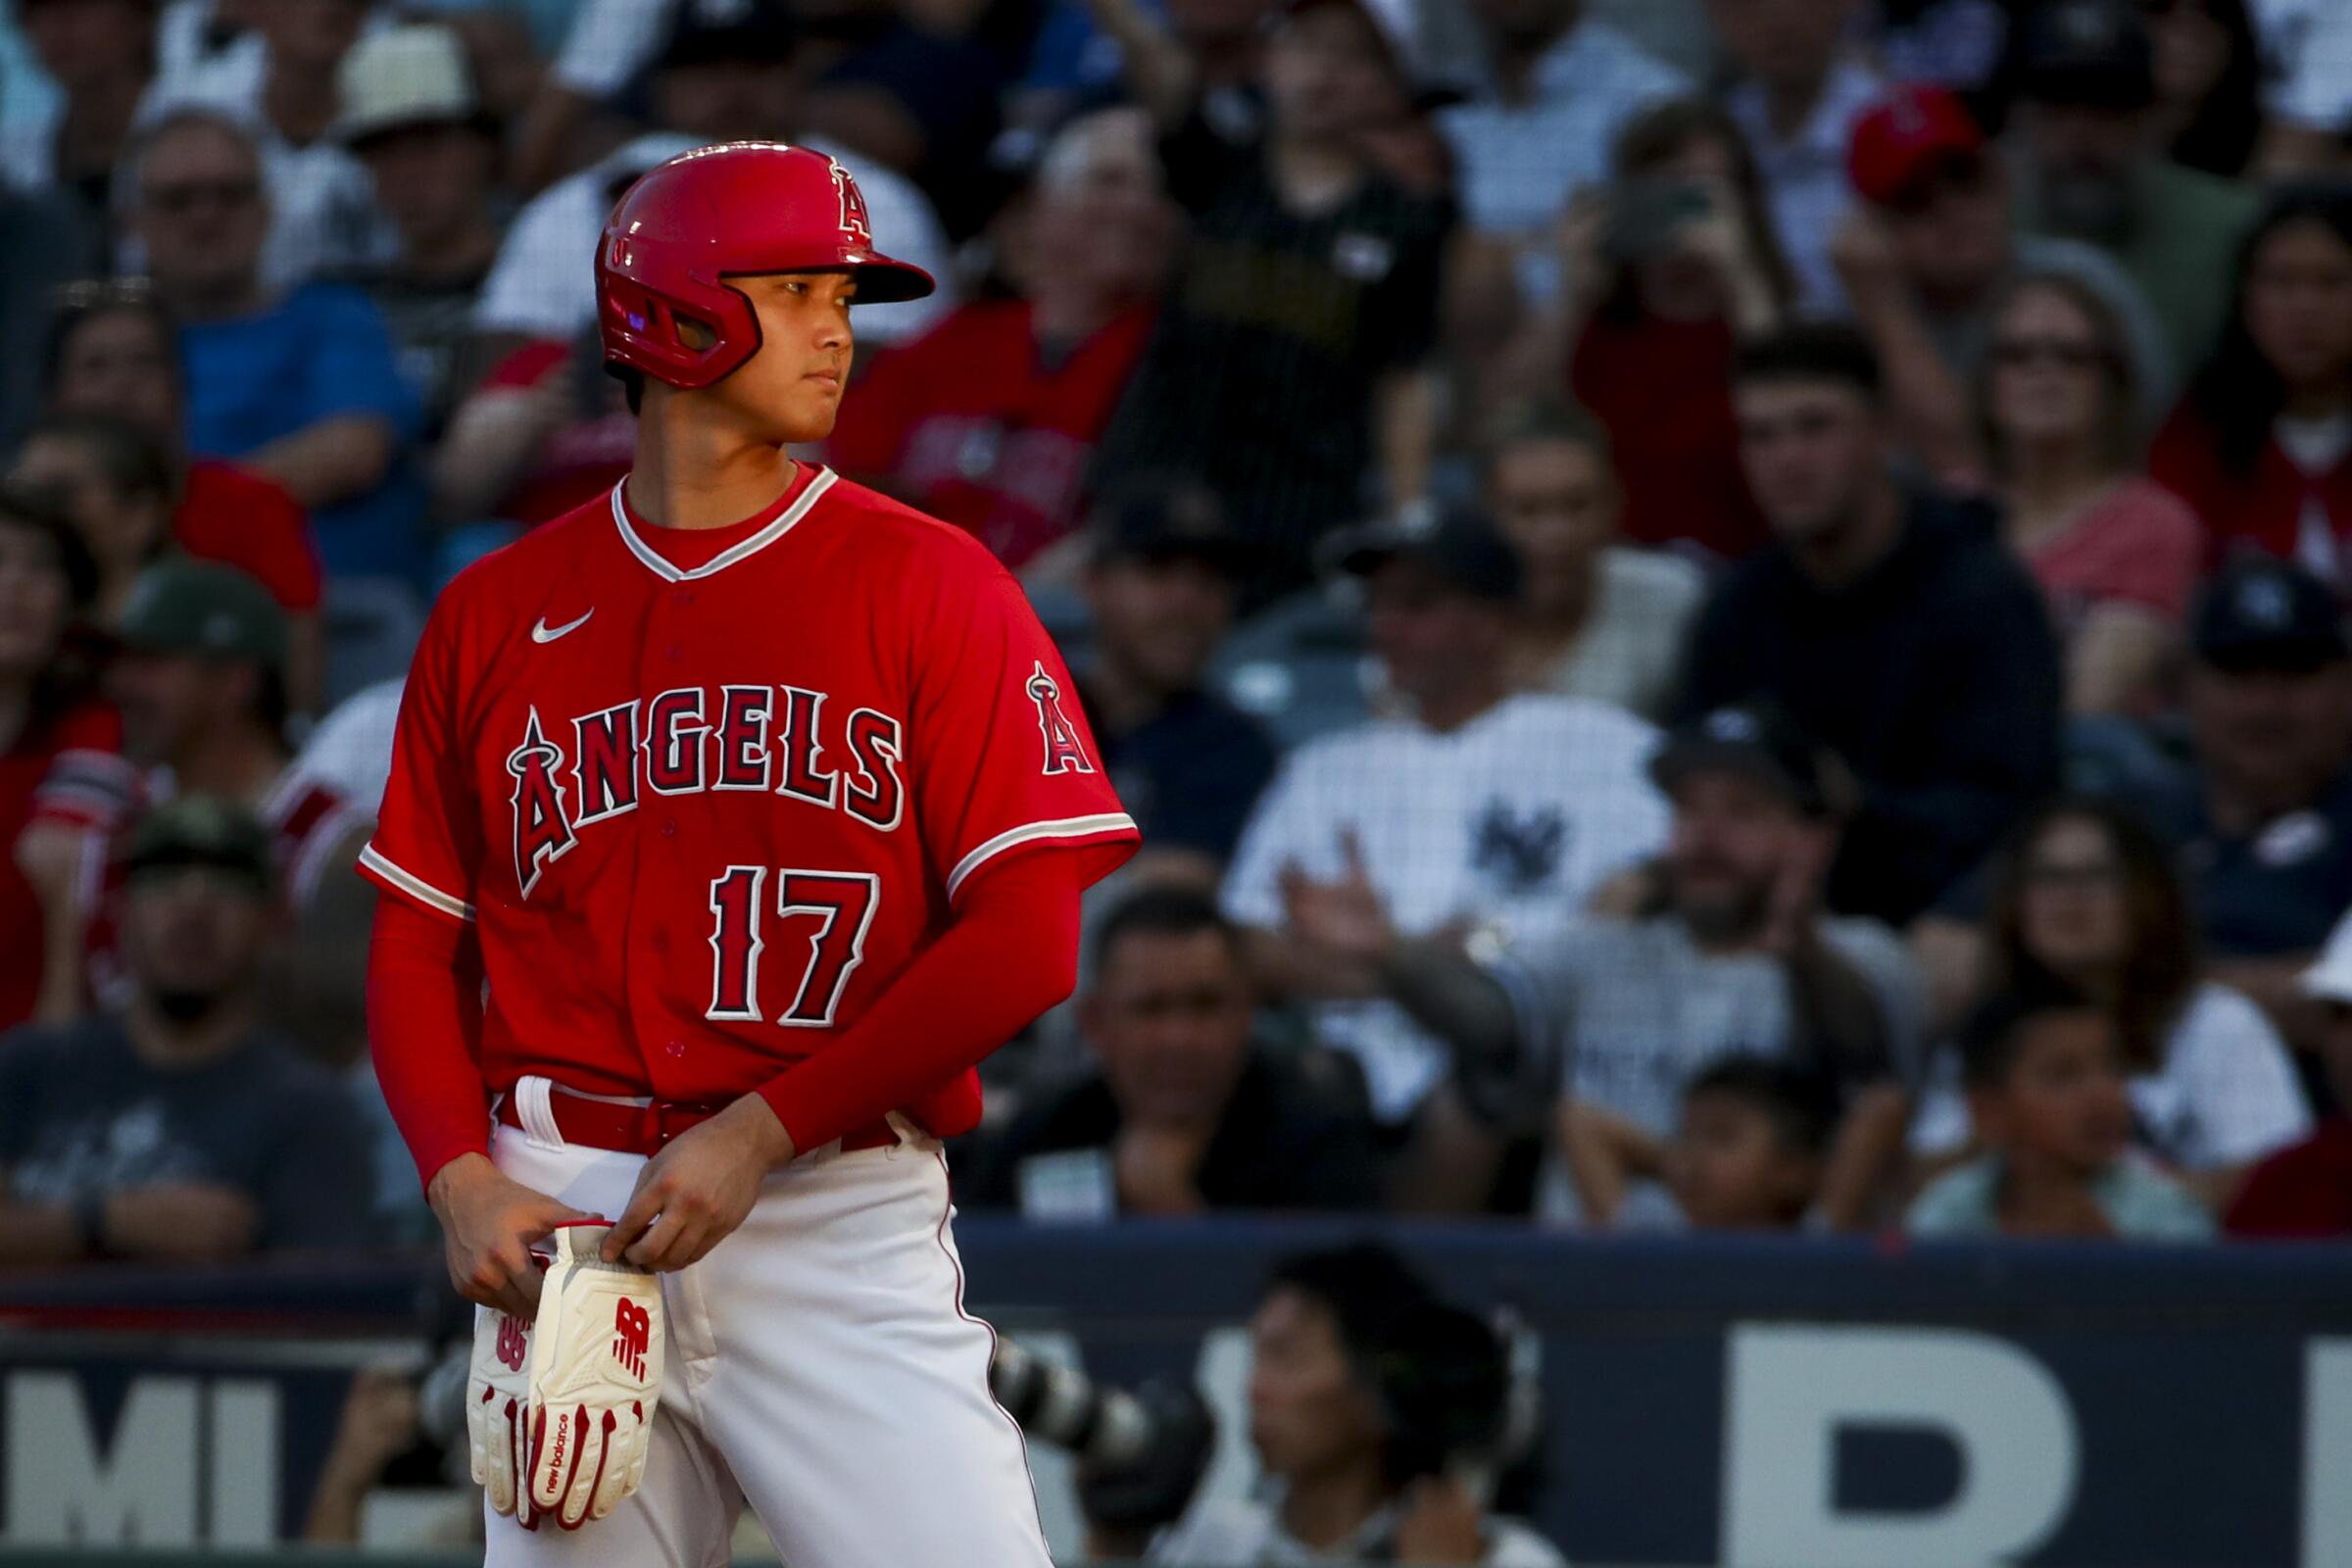 Ranking MLB's top 100 players for 2023: Shohei Ohtani at No. 1